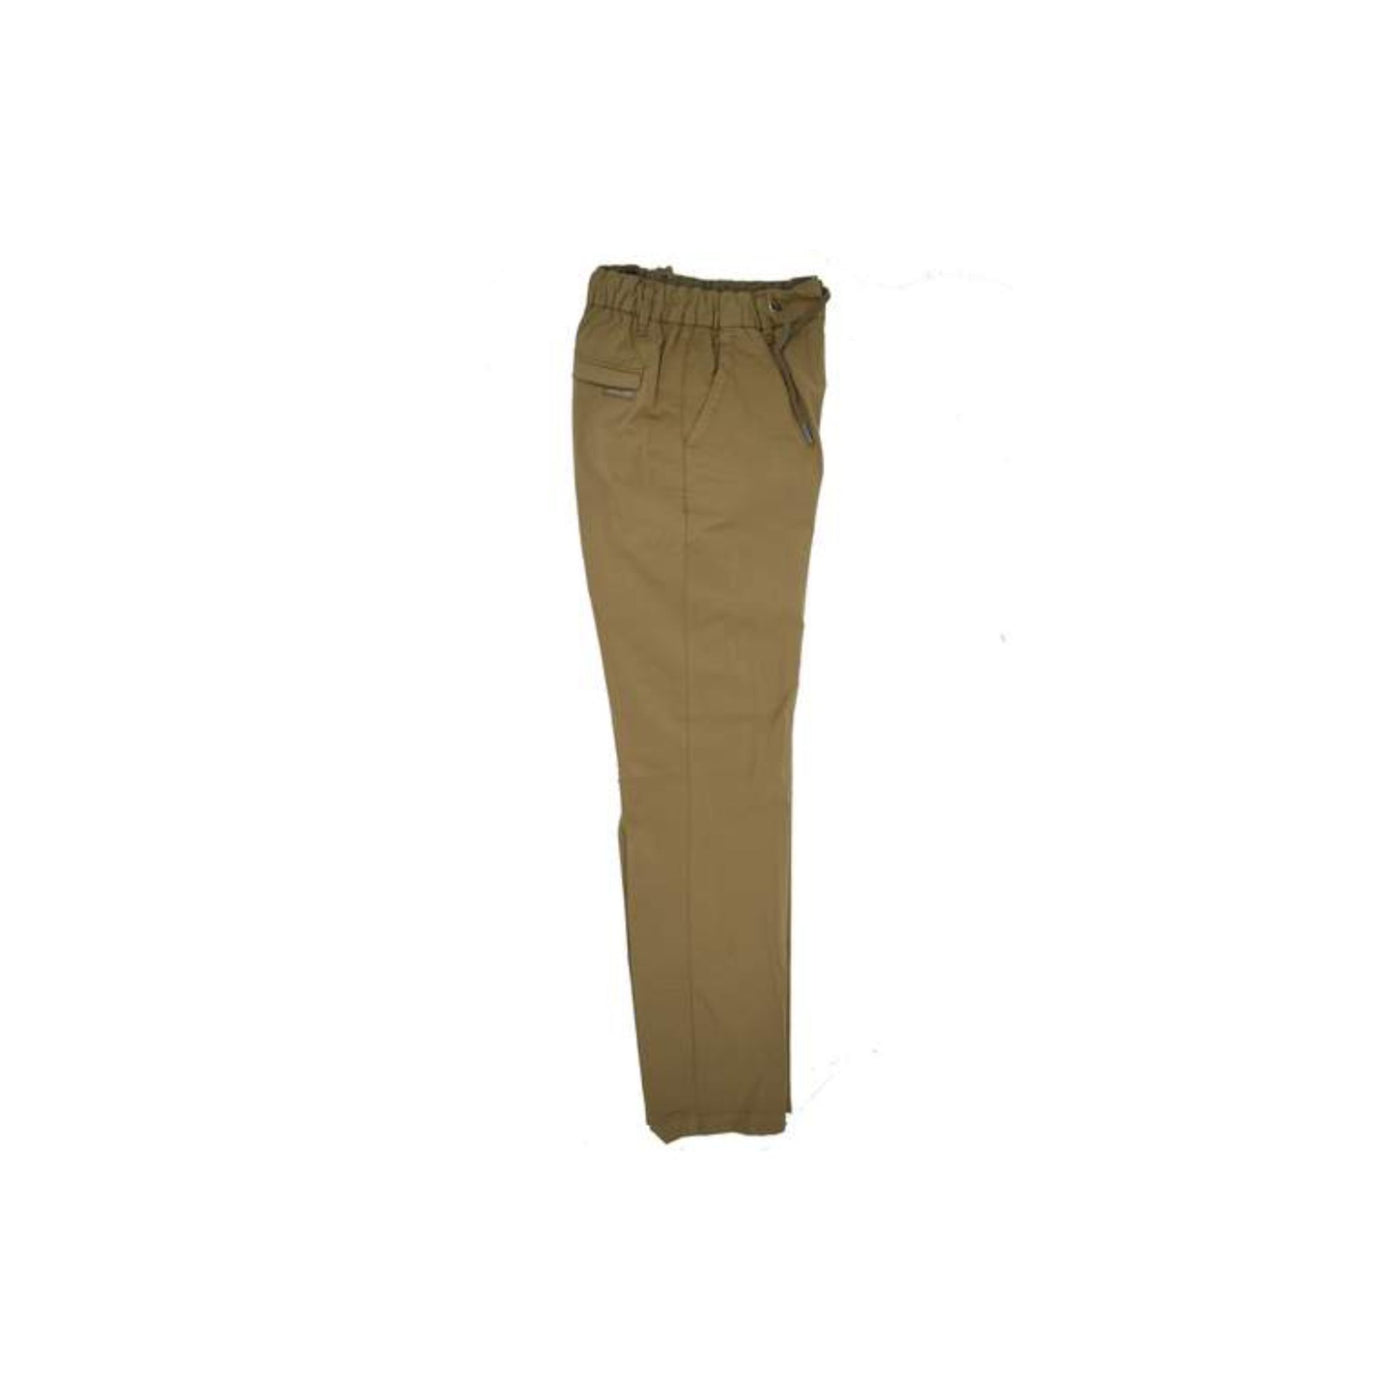 Boy's trousers in solid color with adjustable drawstring